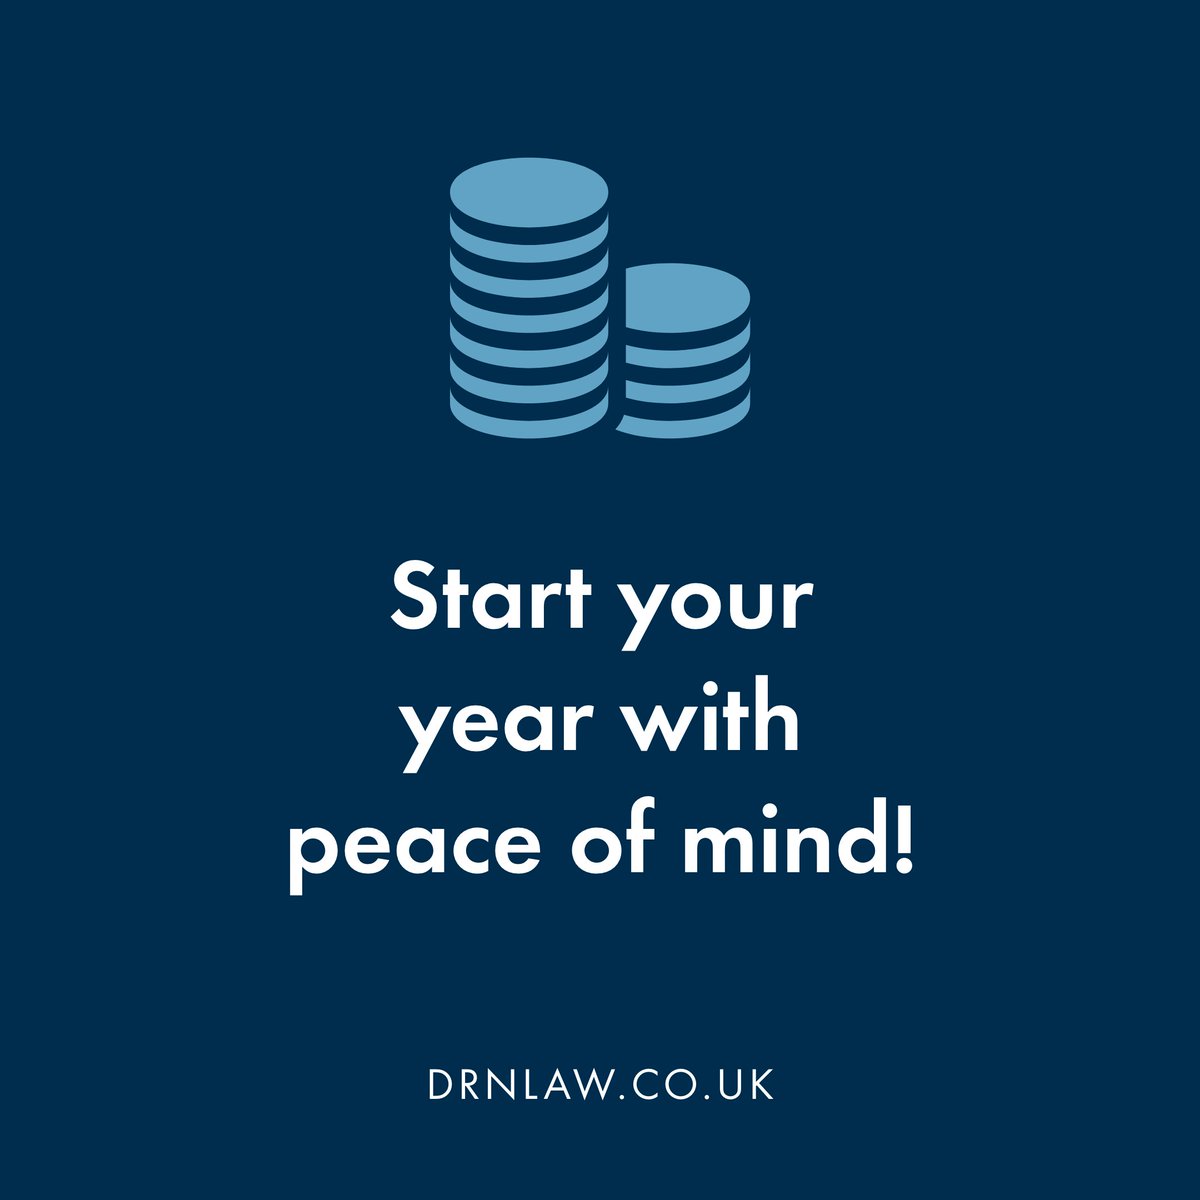 Is one of your New Year's resolutions to improve your financial wellness? 📈 Have you considered will writing? Let us guide you through the process and start your year with a solid financial plan! 👉 bit.ly/3PRteBp